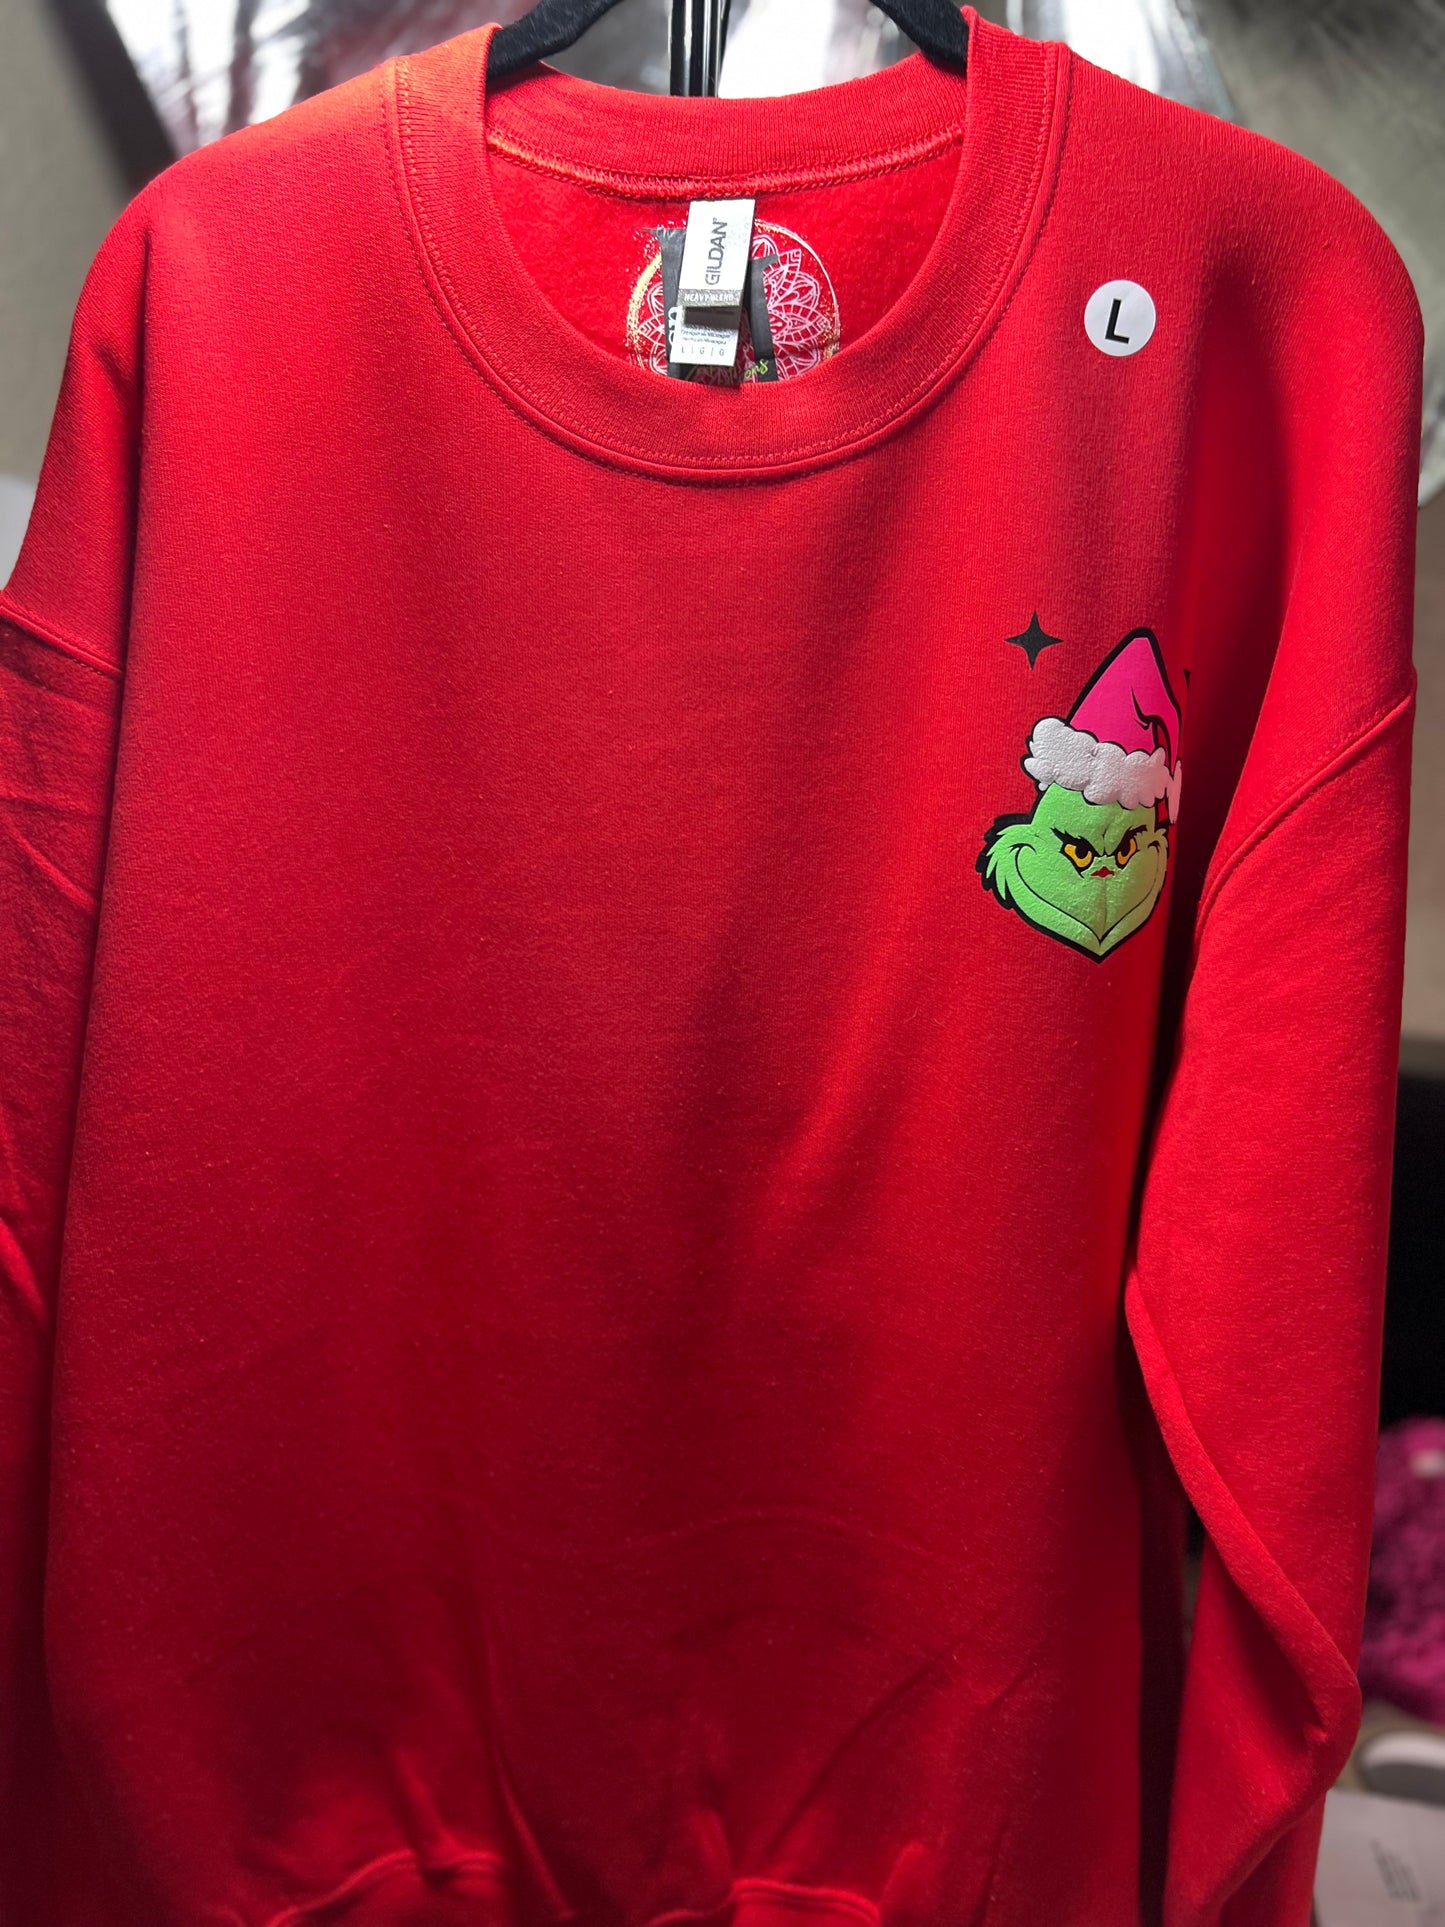 Elevate Your Style: In My Grinch Era Red Sweatshirt - Cozy and Playful Fashion